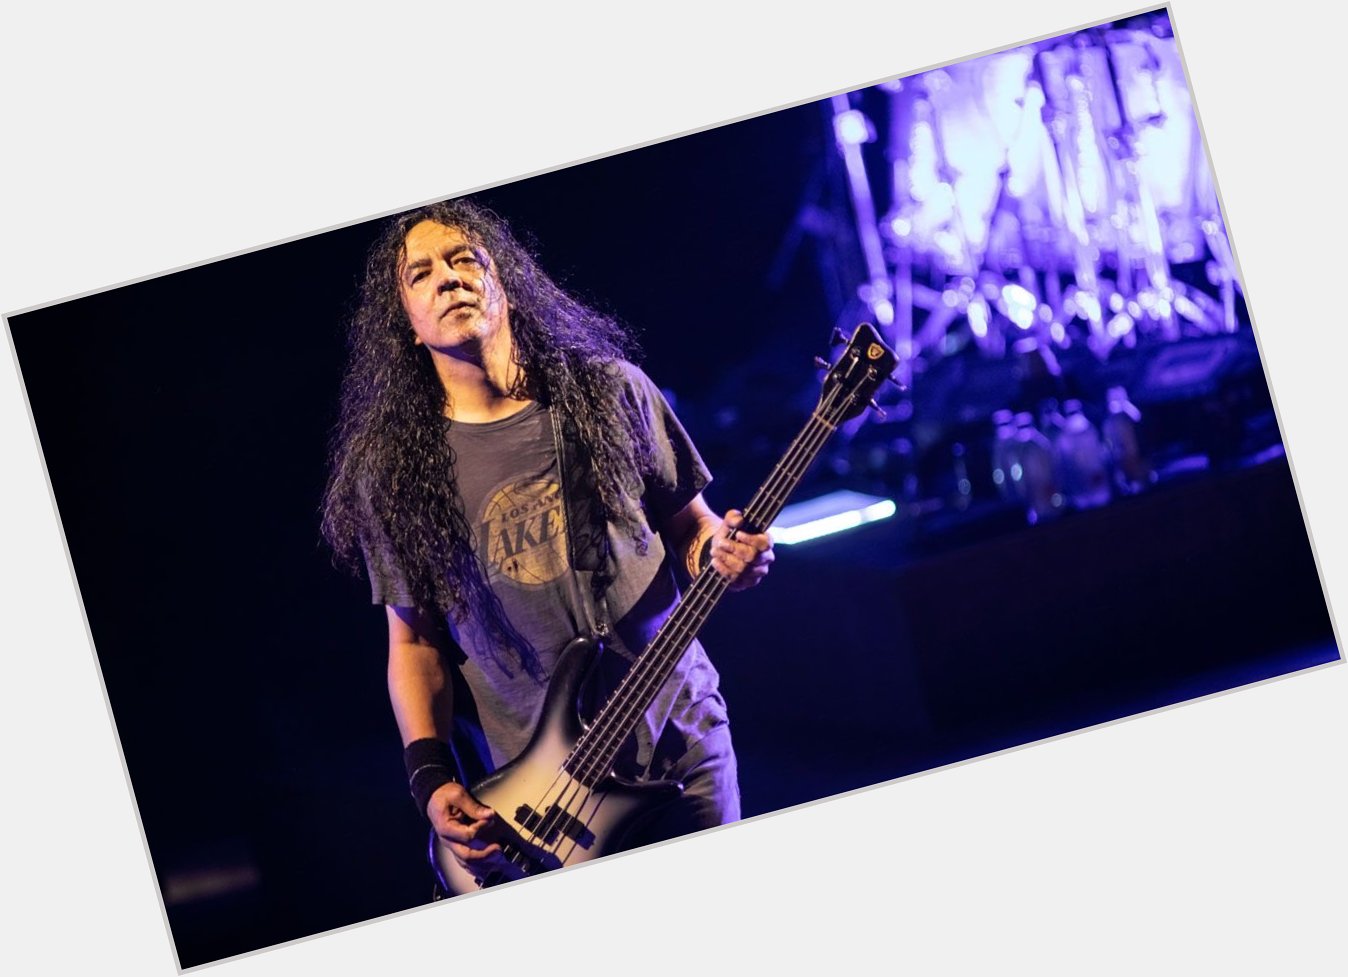 I\d like to wish a happy 55th birthday to Mike Inez, bassist for Alice in Chains! 